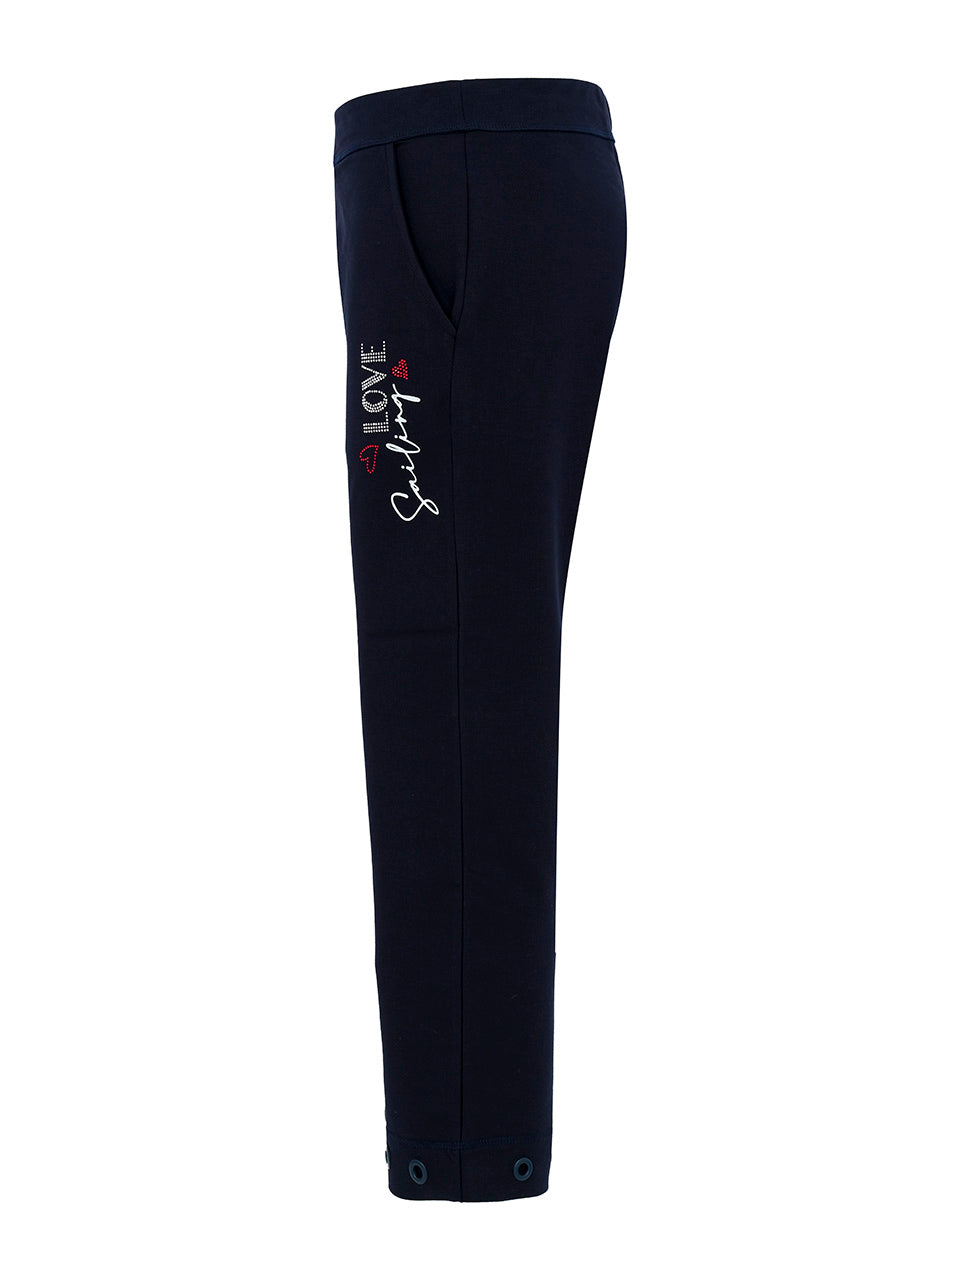 LOVE SAILING CROP PANT WITH GROMMETS